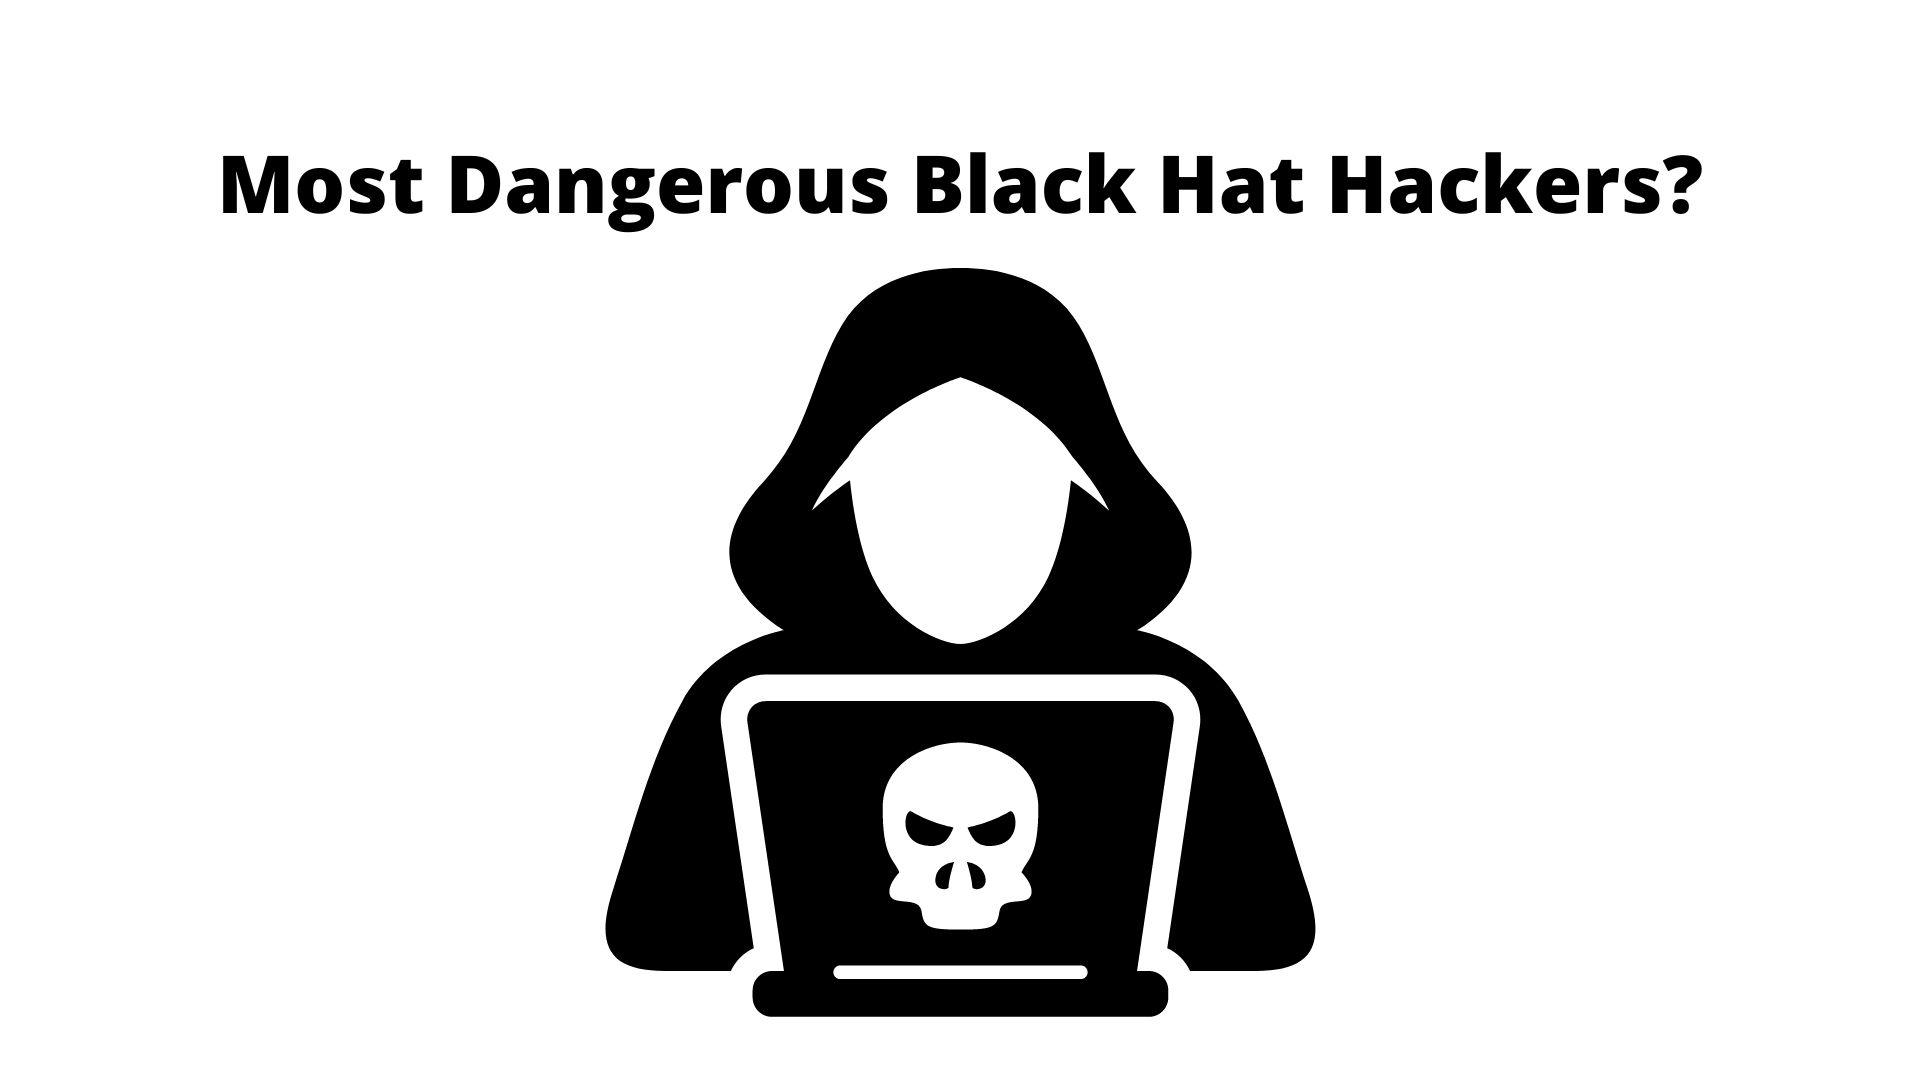 Mysterious Hackers Revealed: Who Are The Most Dangerous Black Hat Hackers?